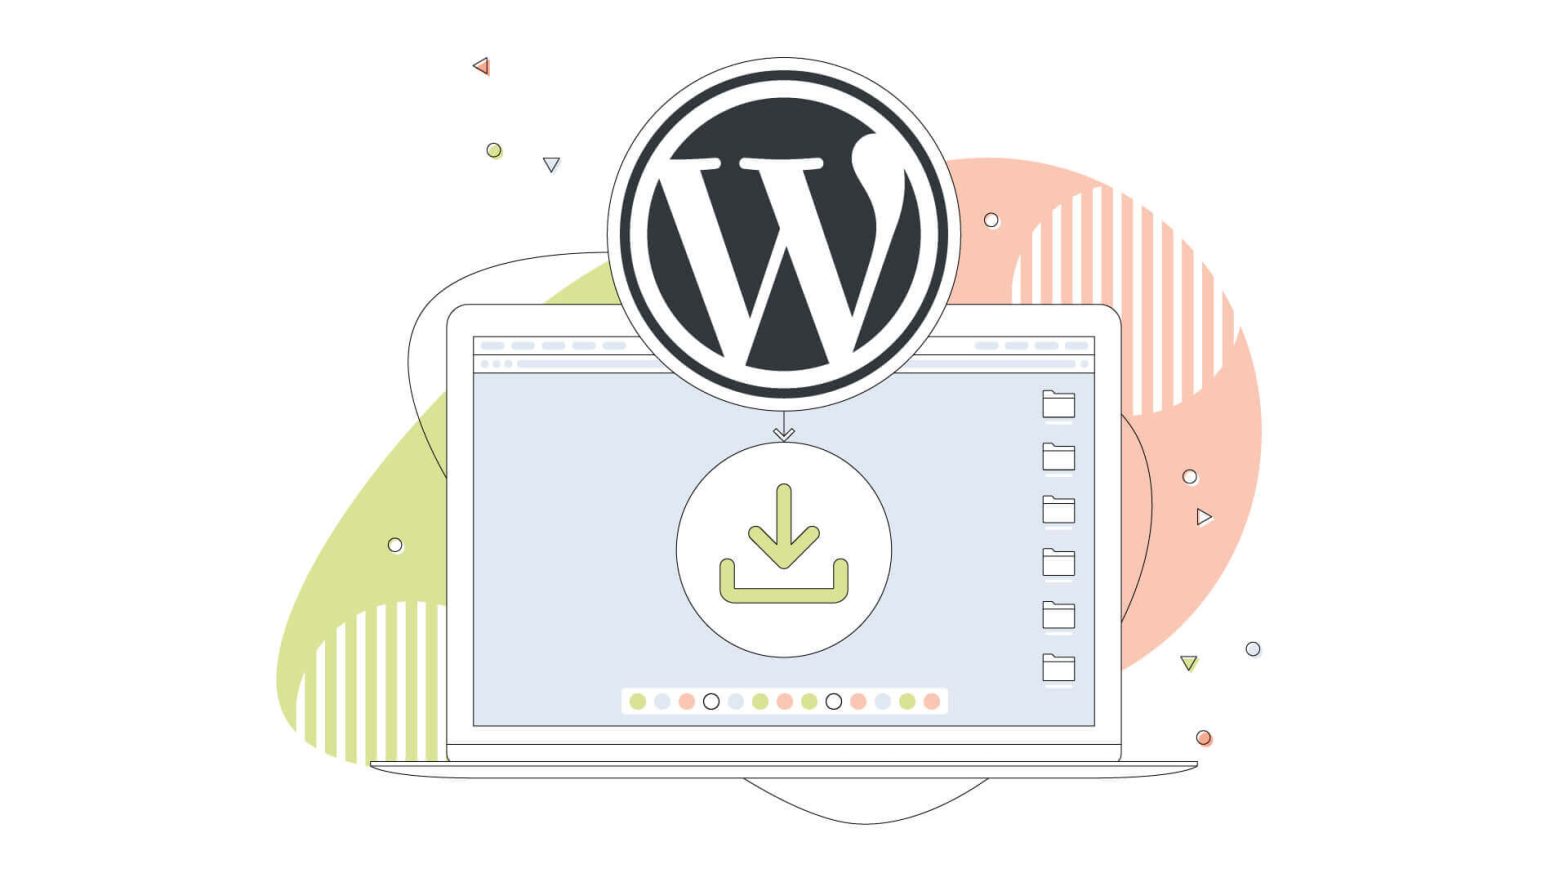 How to Install WordPress Locally on Your Computer